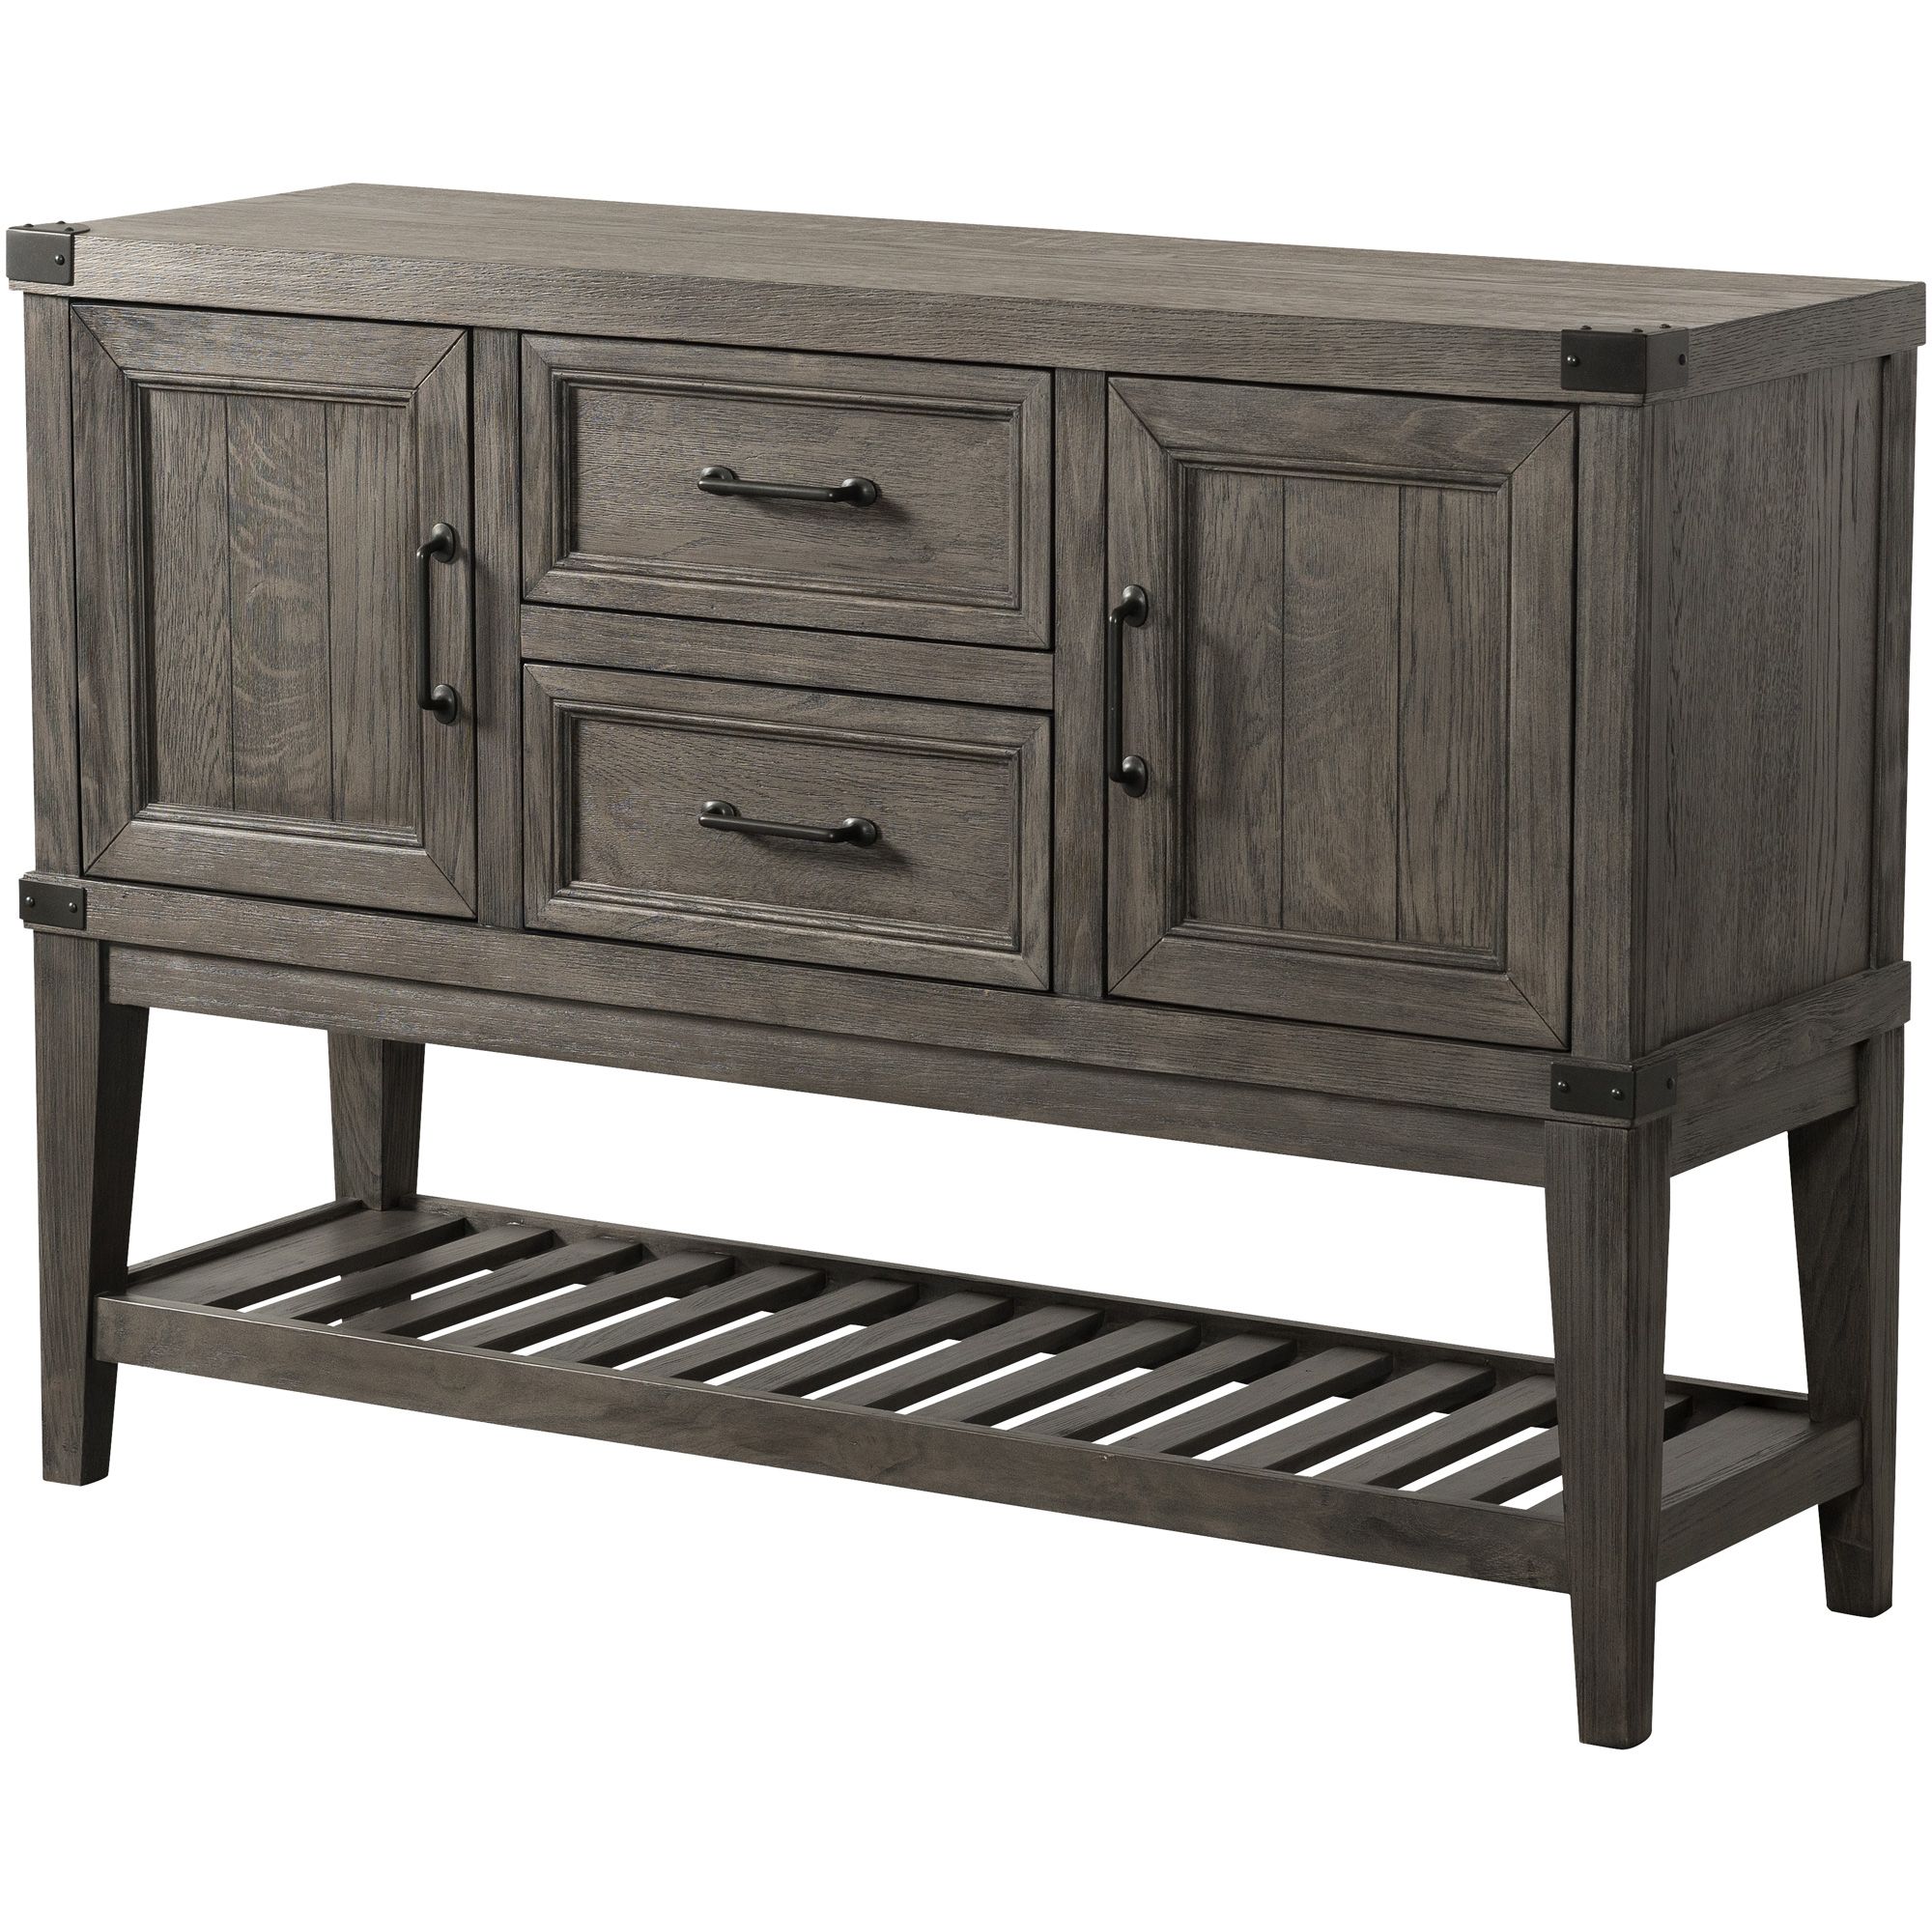 Slumberland Furniture | Foundry Pewter Server With Most Popular Sideboards By Foundry Select (View 16 of 20)